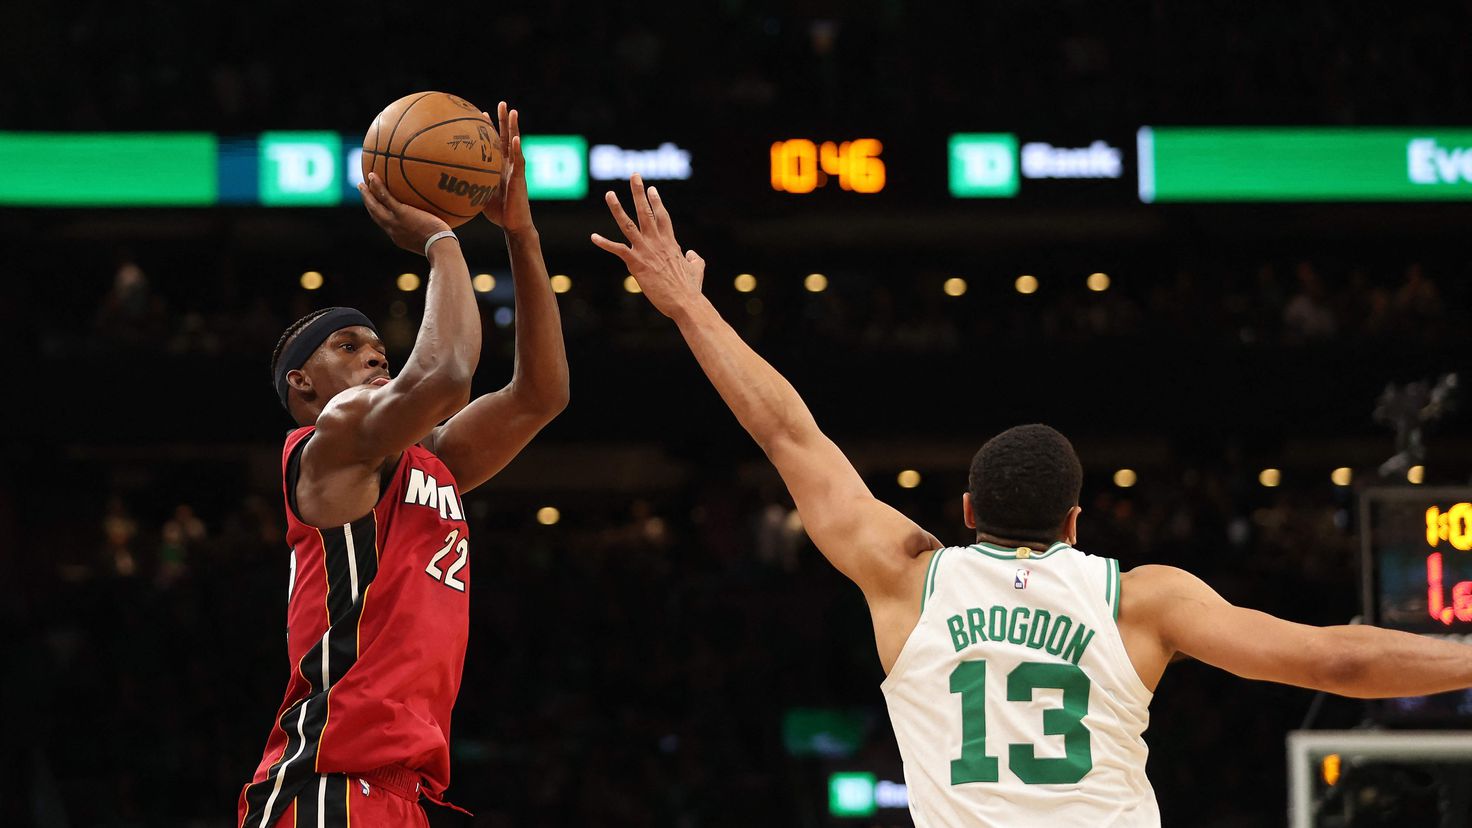  Jimmy Butler follows in the footsteps of Michael Jordan and gets record numbers vs.  Celtics
